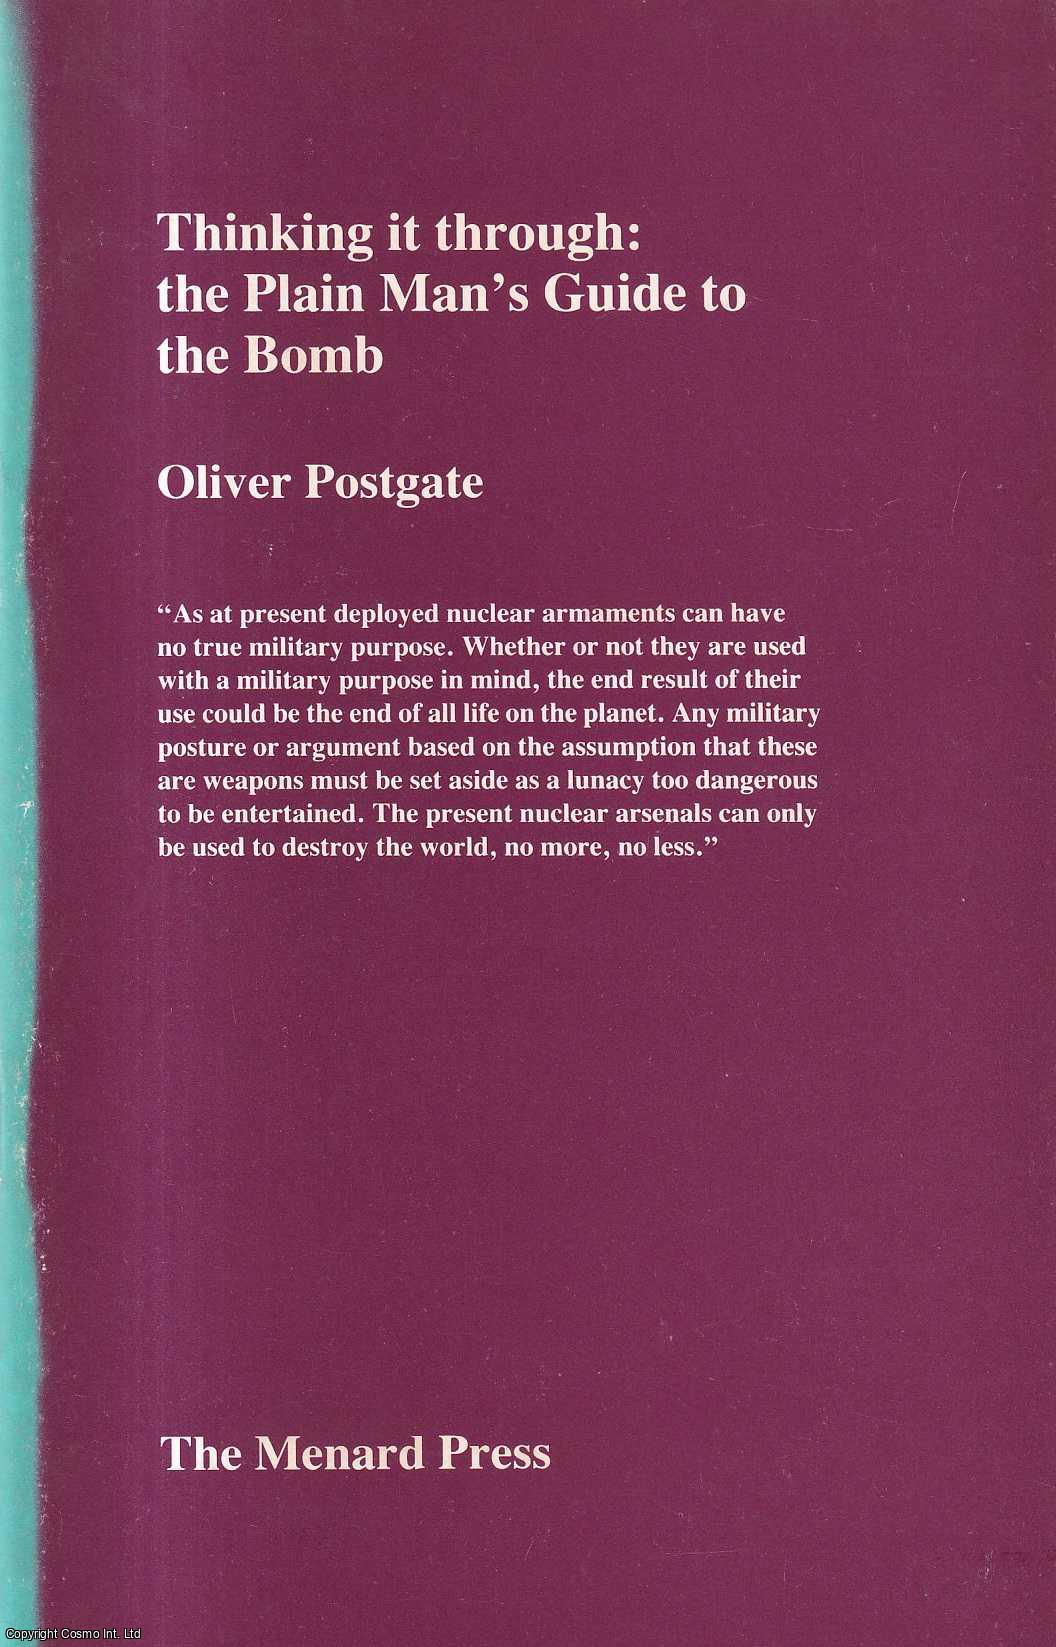 Oliver Postgate - Thinking it through: the Plain Man's Guide to the Bomb.